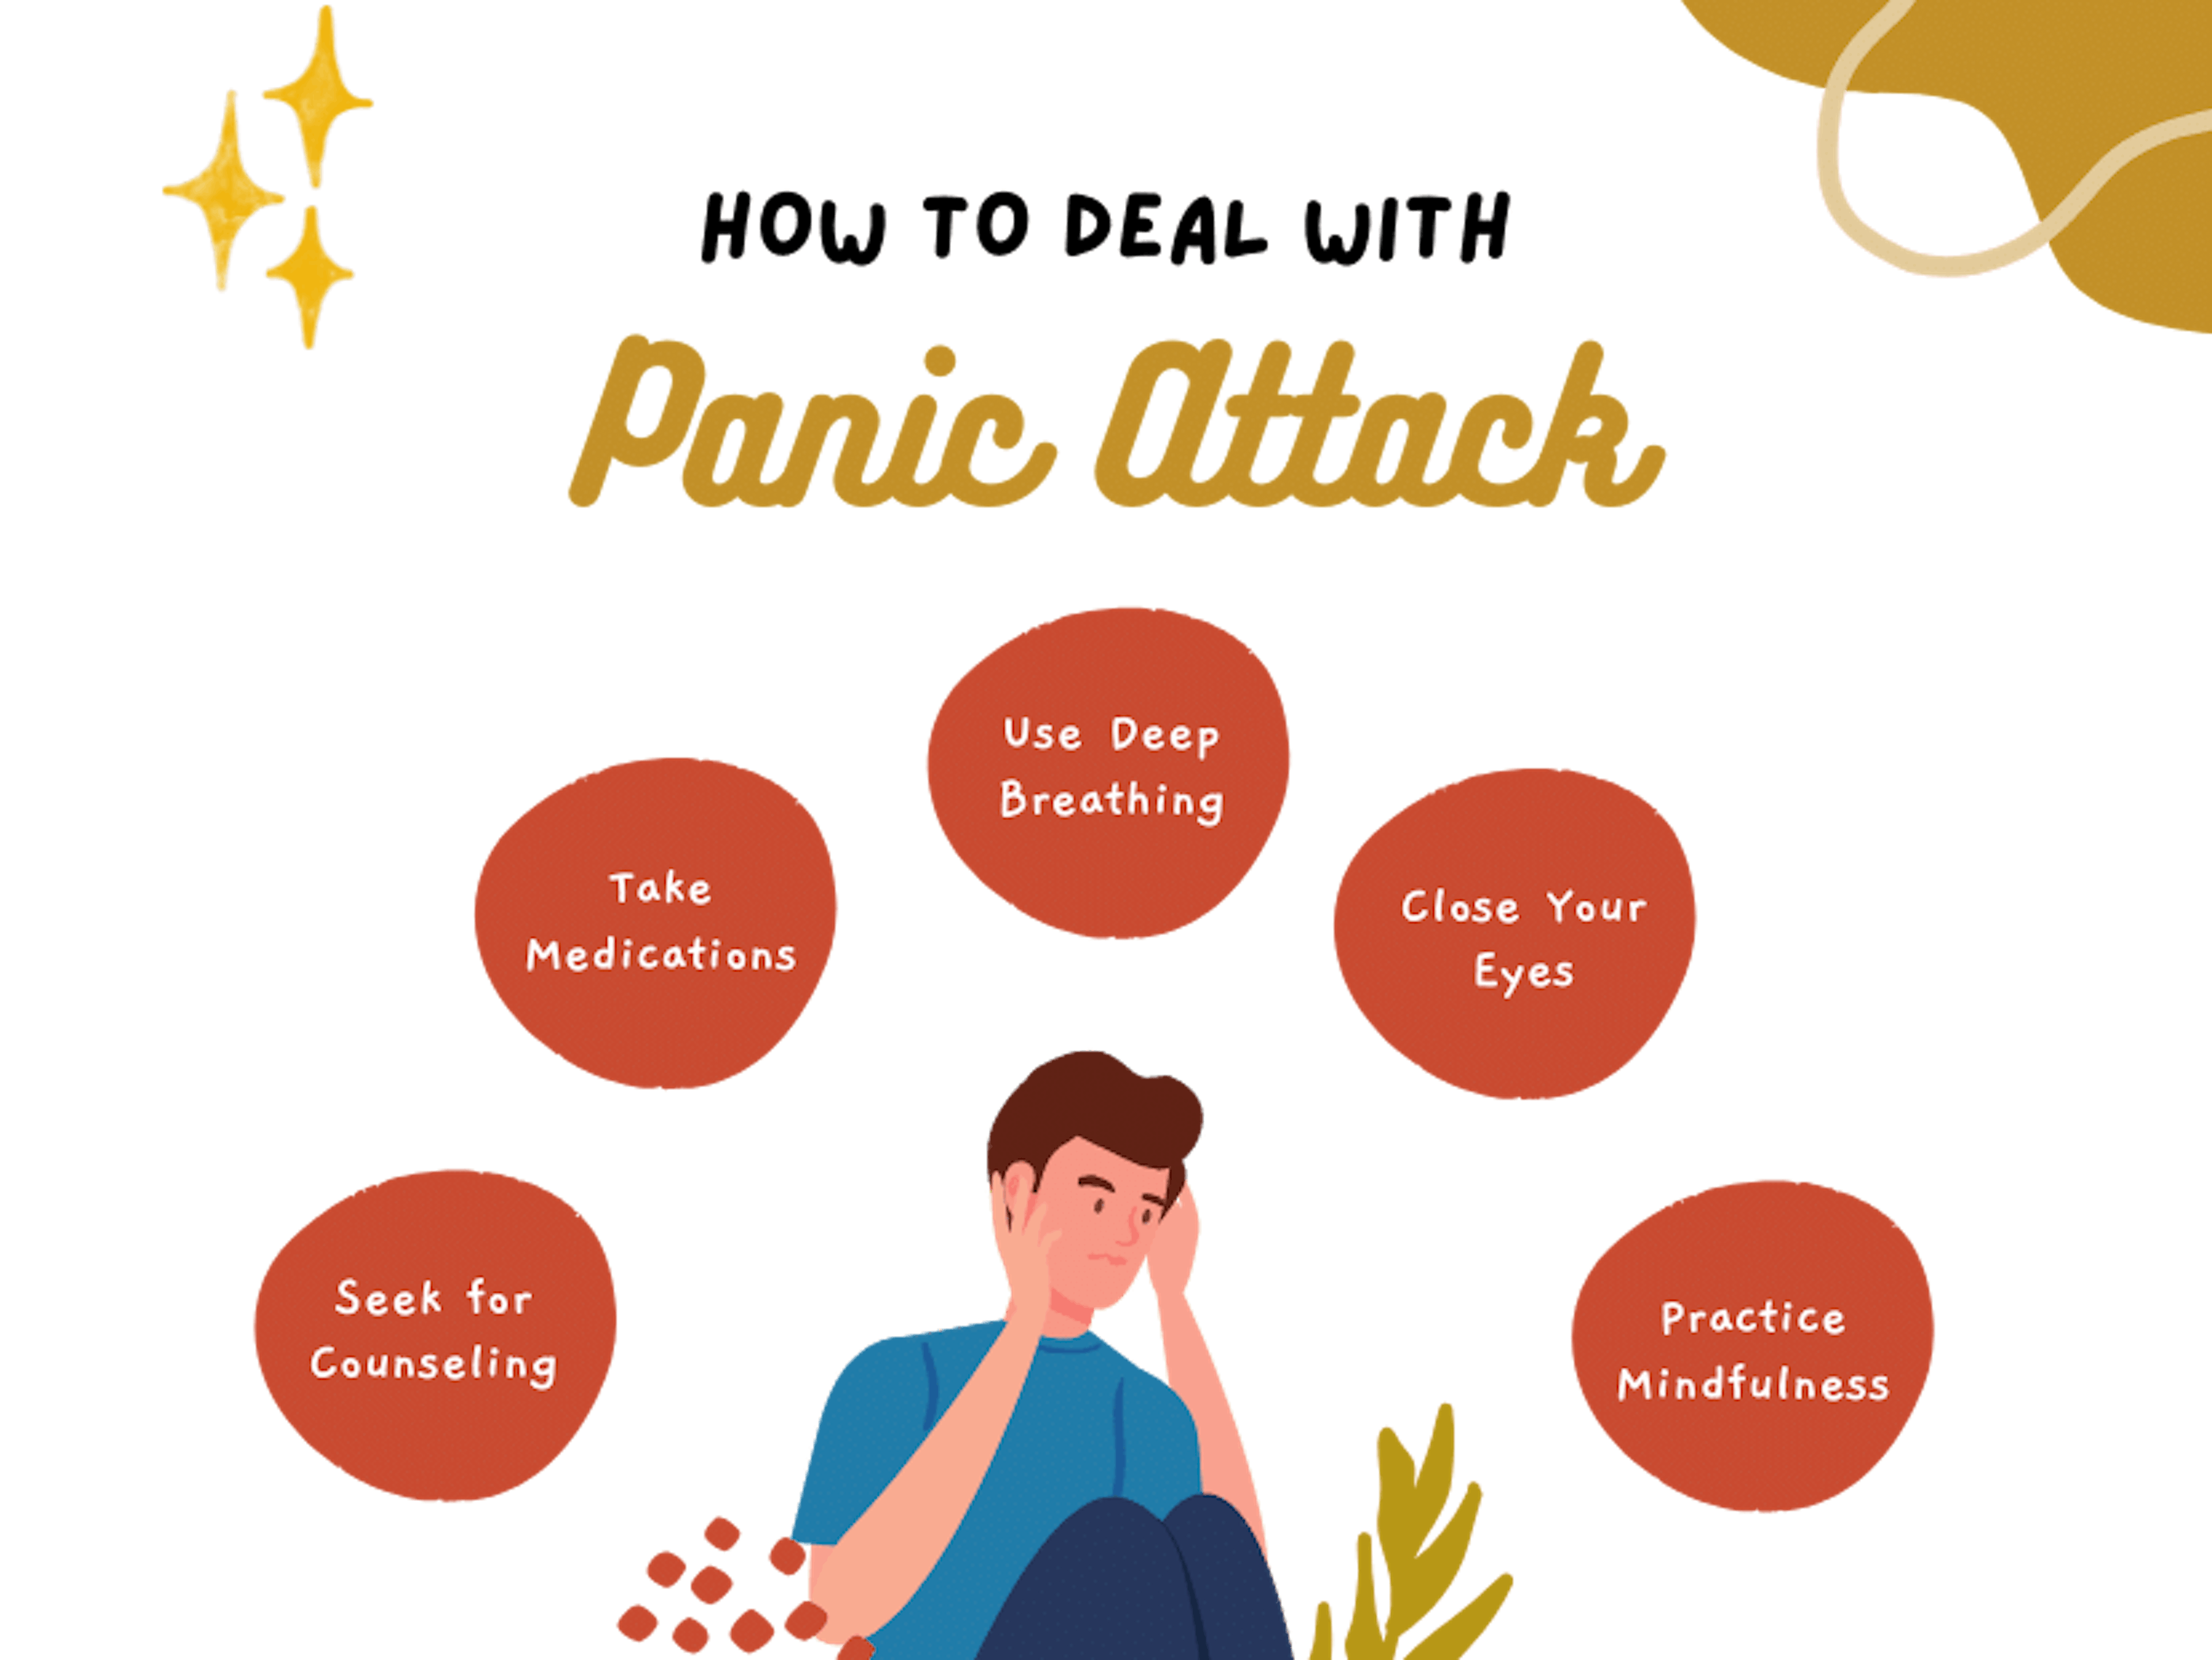 How to deal with panic attack?